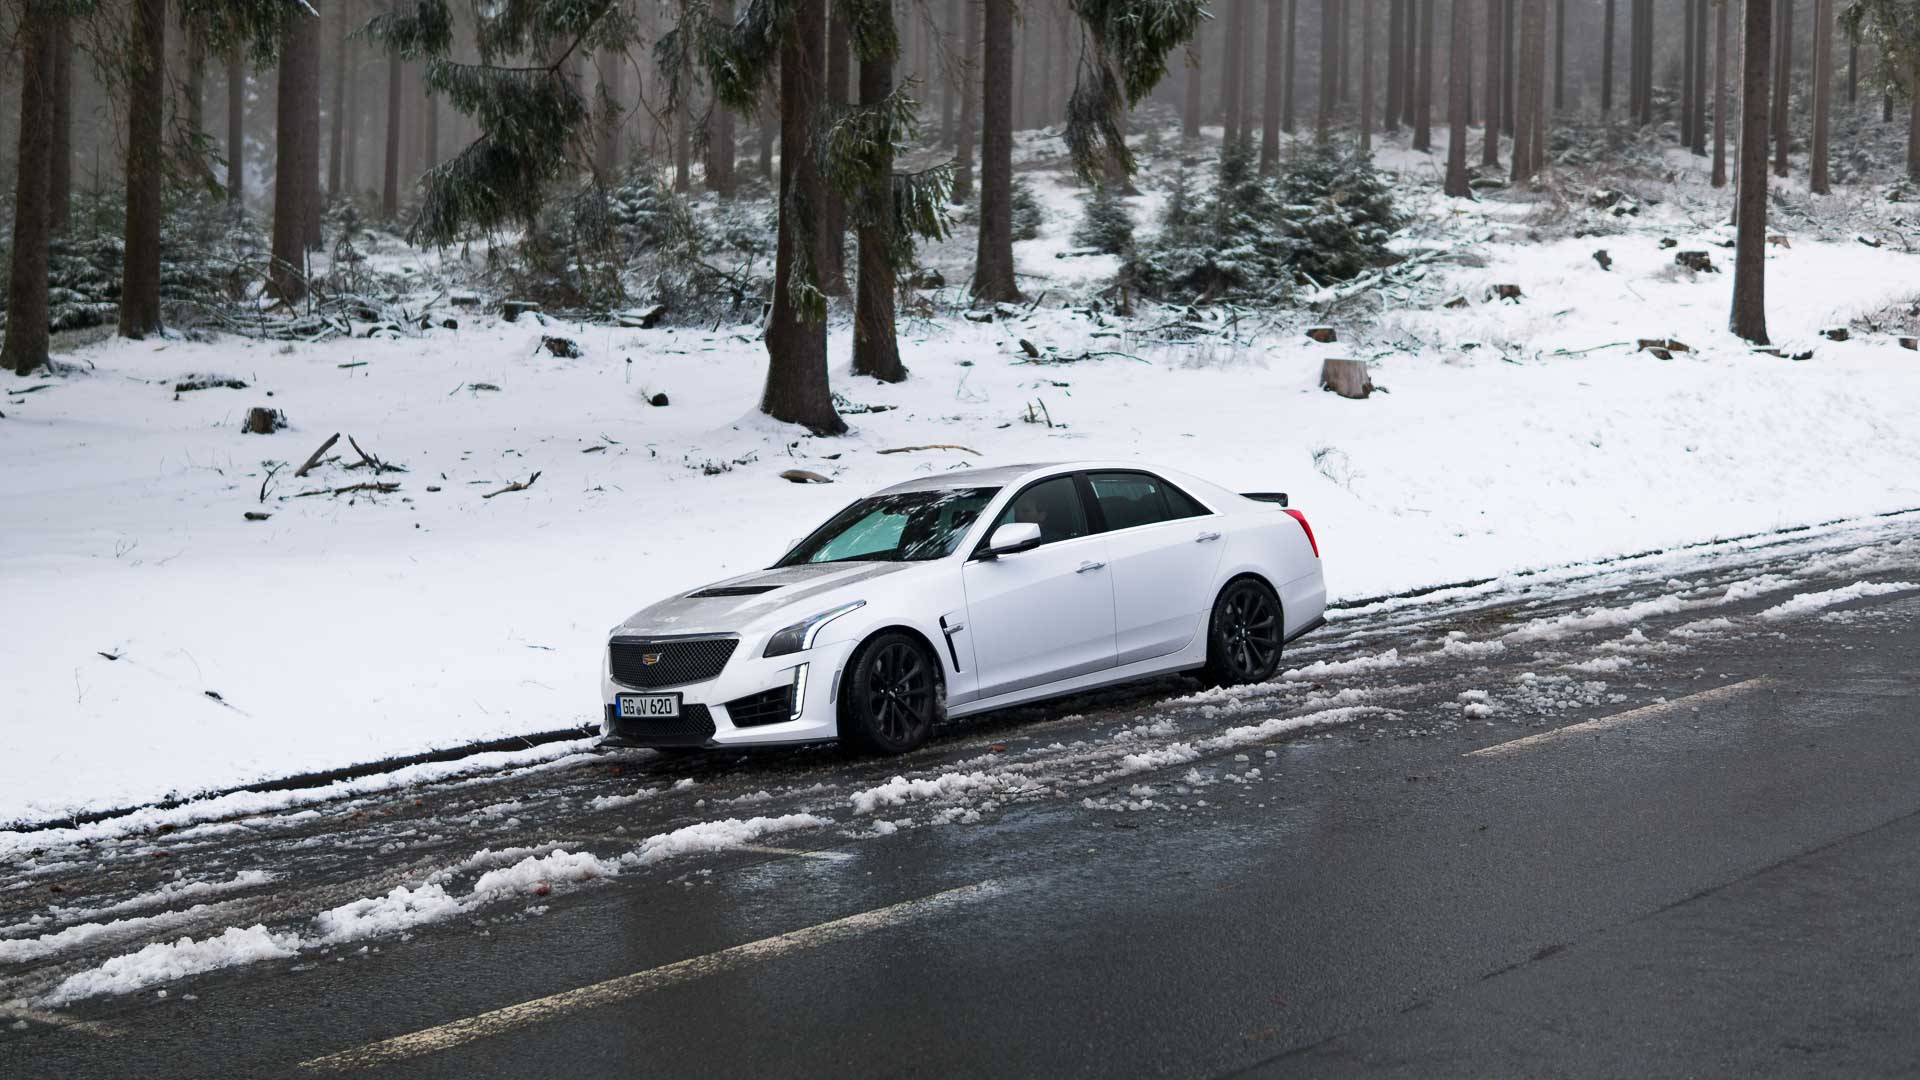 Heart and Soul: Der Cadillac CTS-V im (letzten) Test